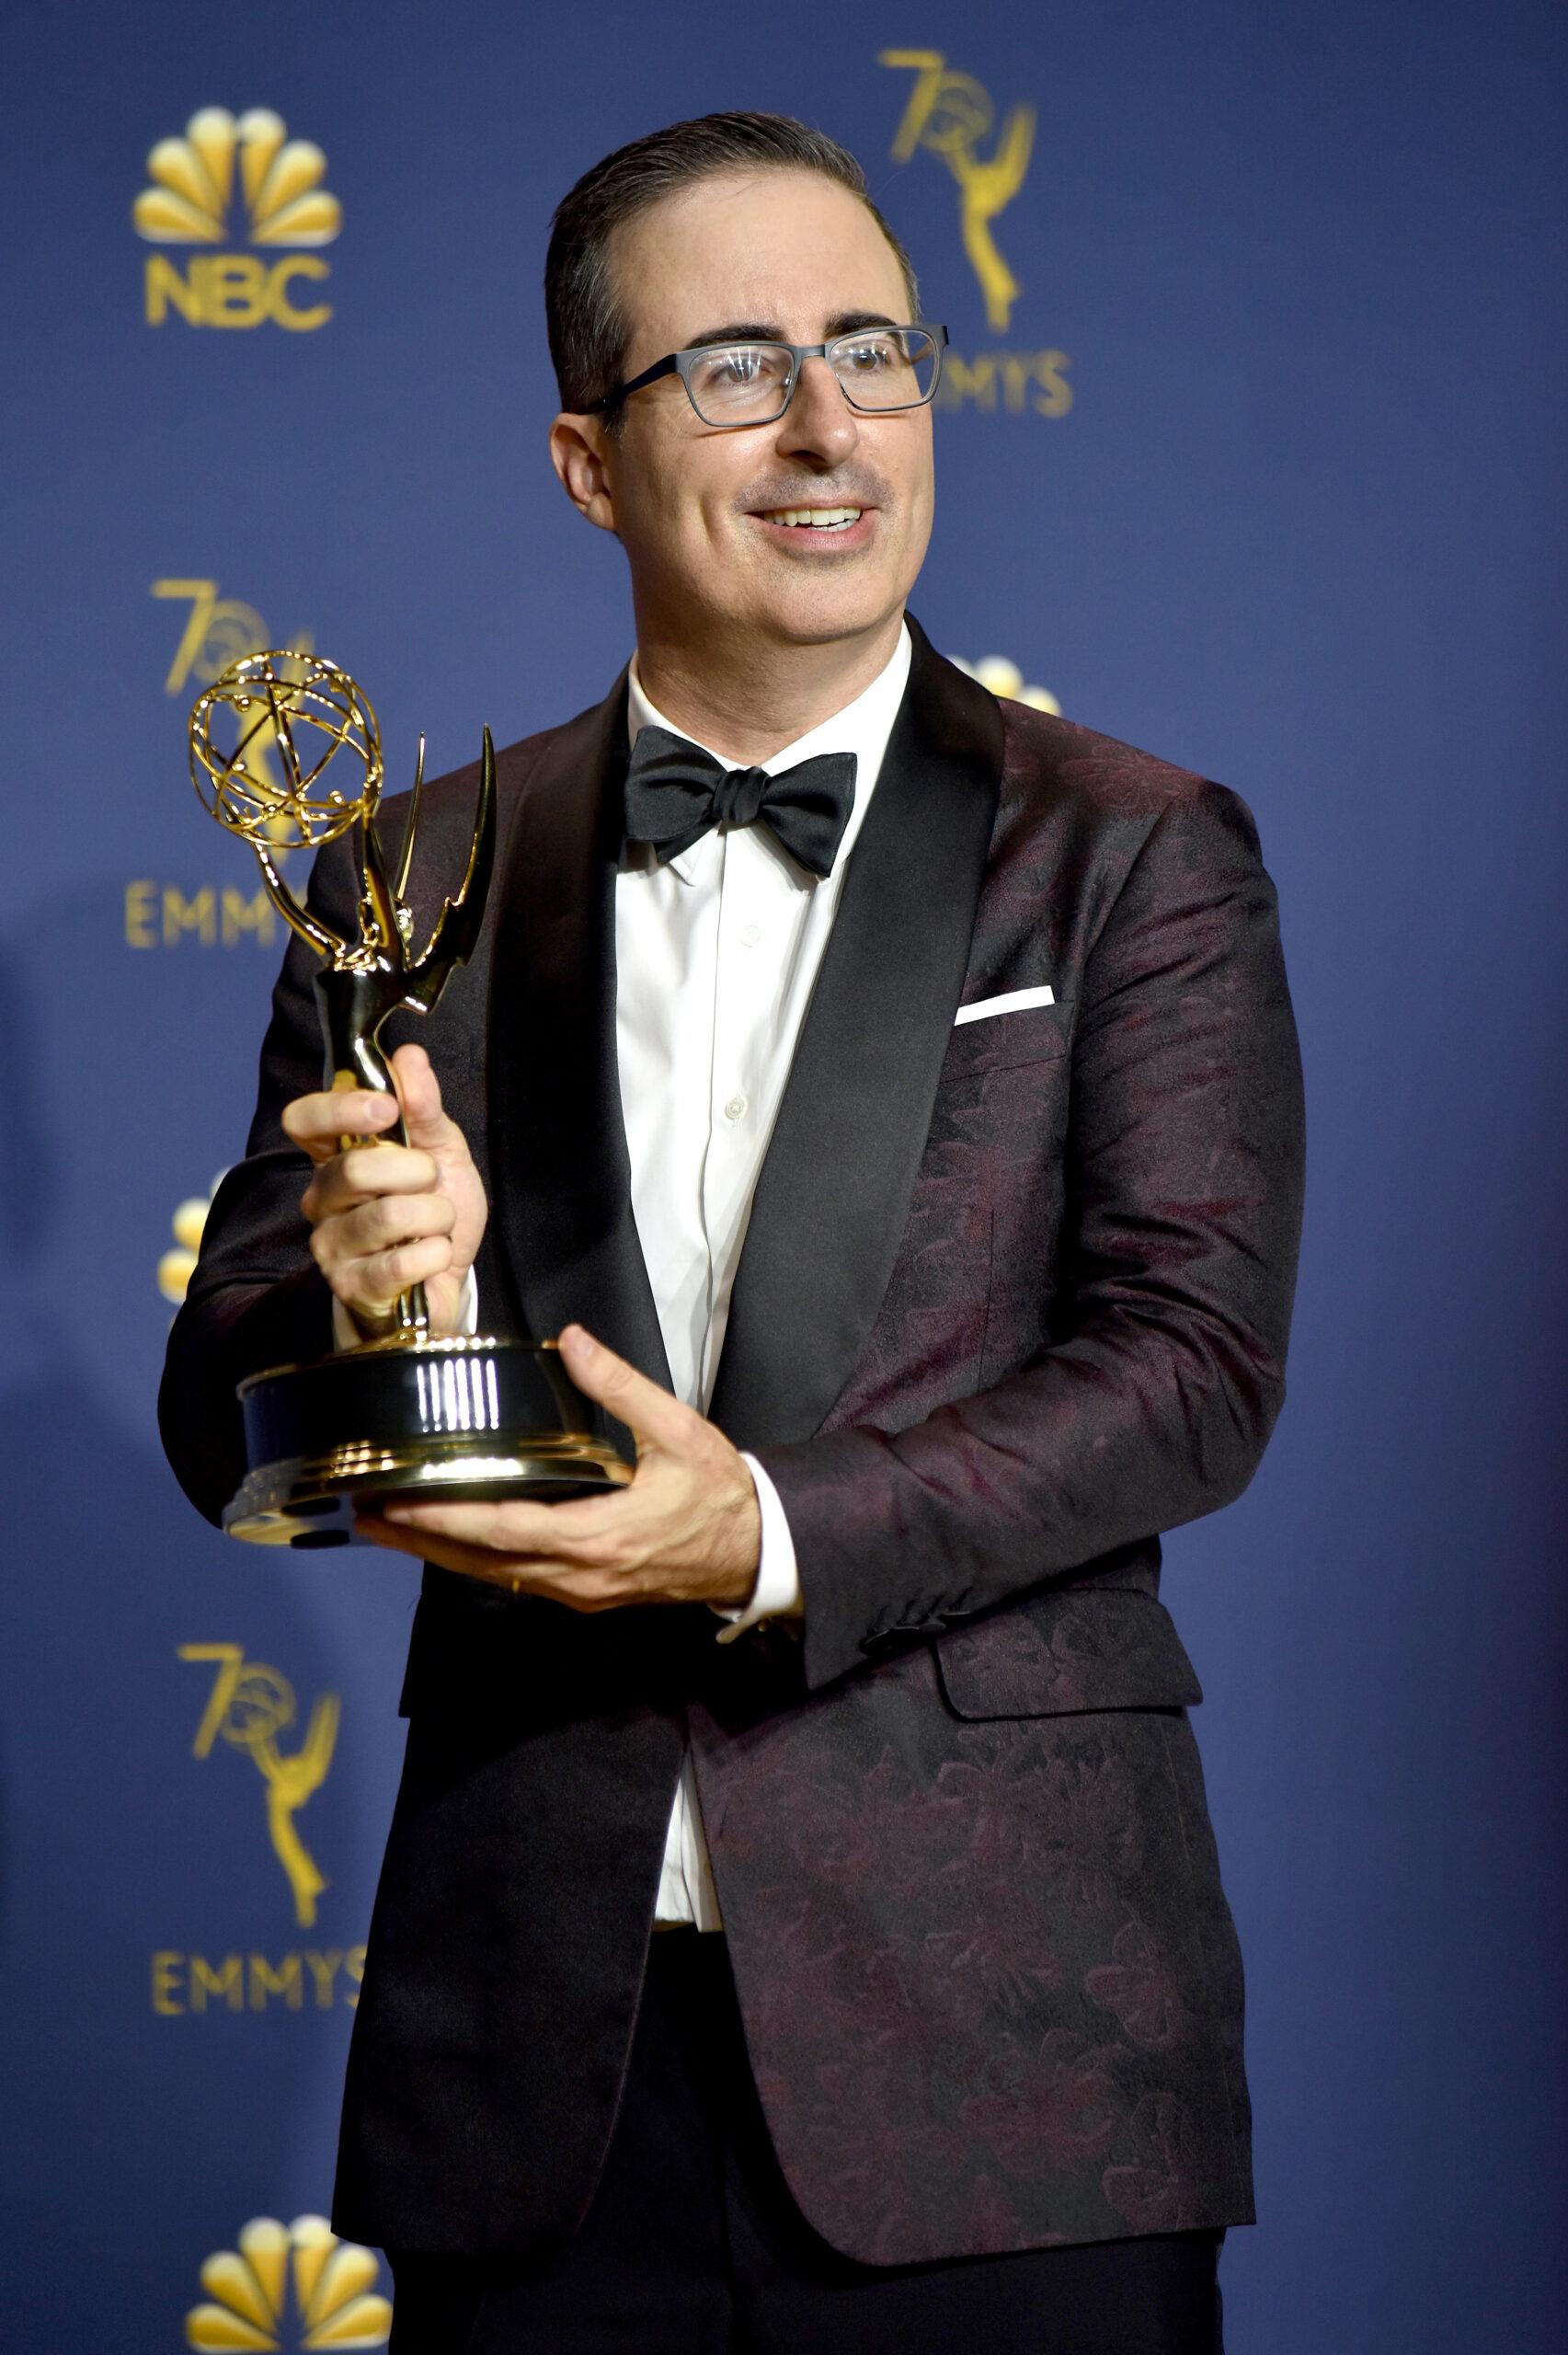 John Oliver wins award at the 70th Primetime Emmy Awards in Los Angeles